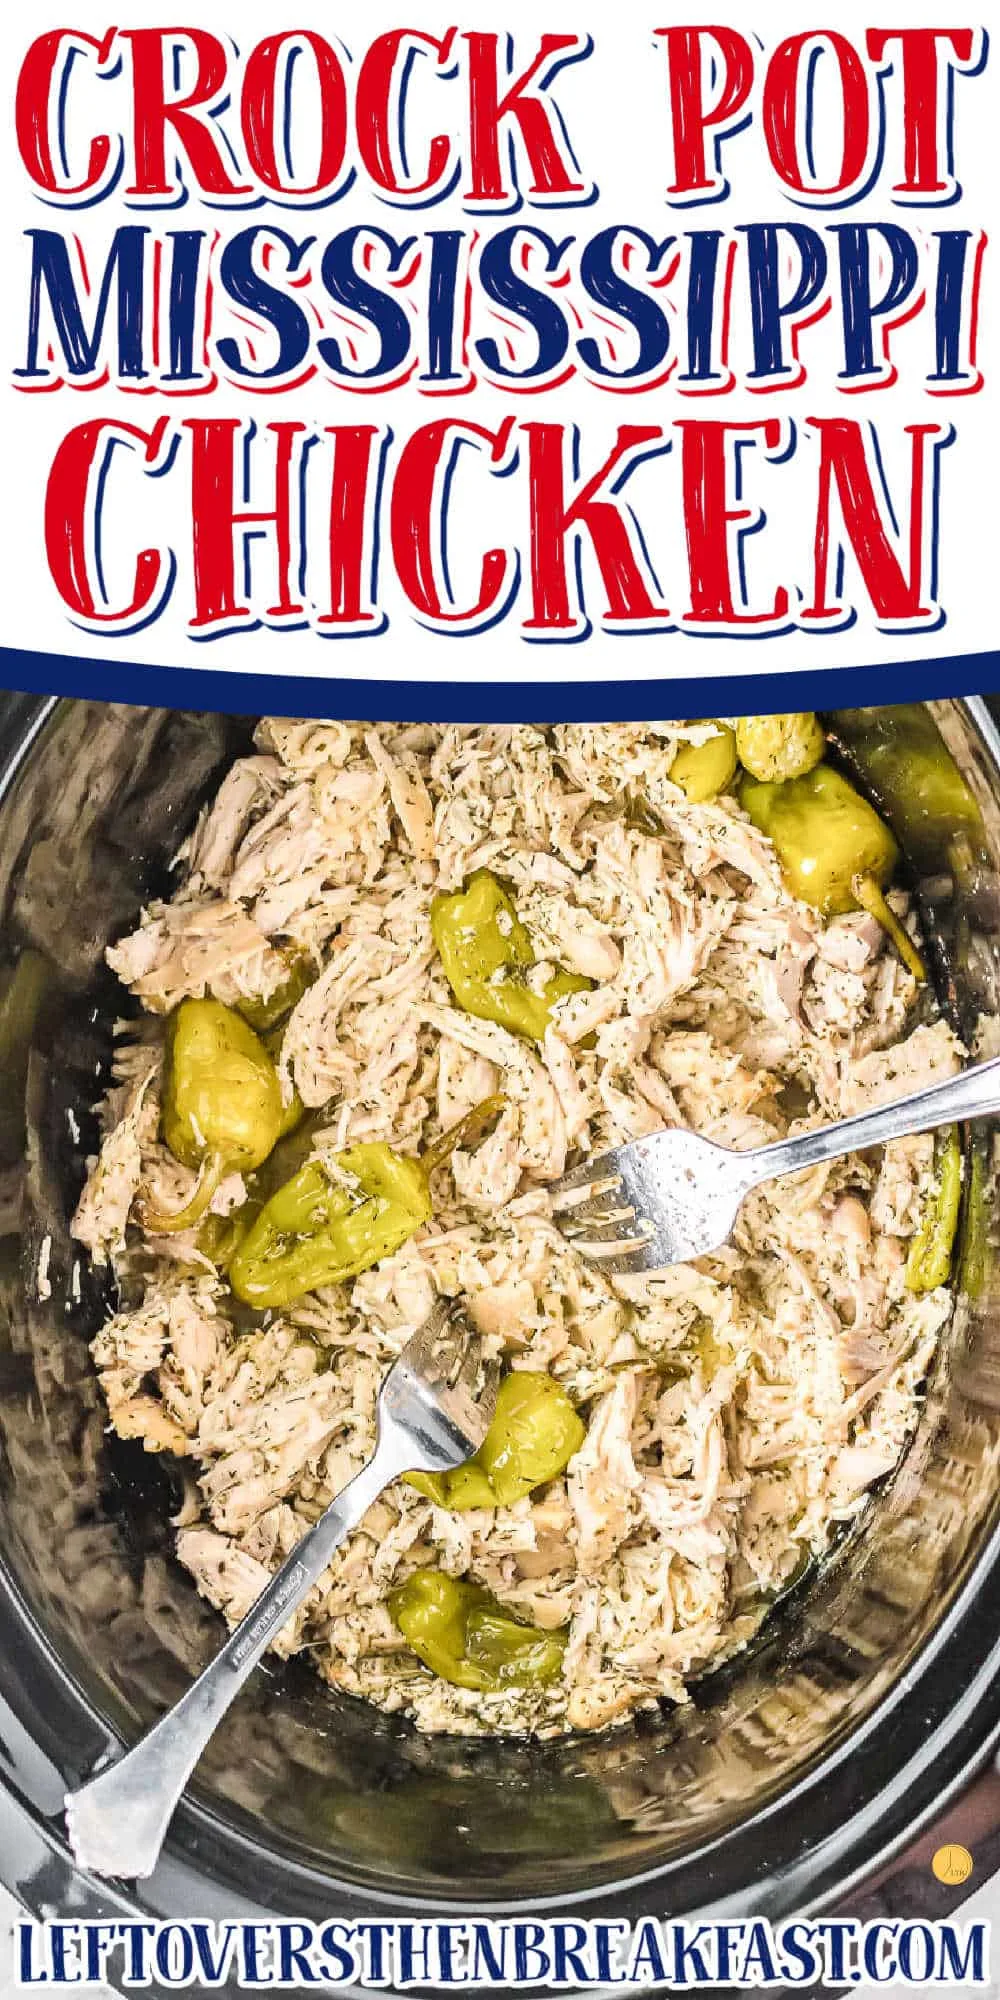 crock pot with shredded chicken with text "crock pot mississippi chicken"